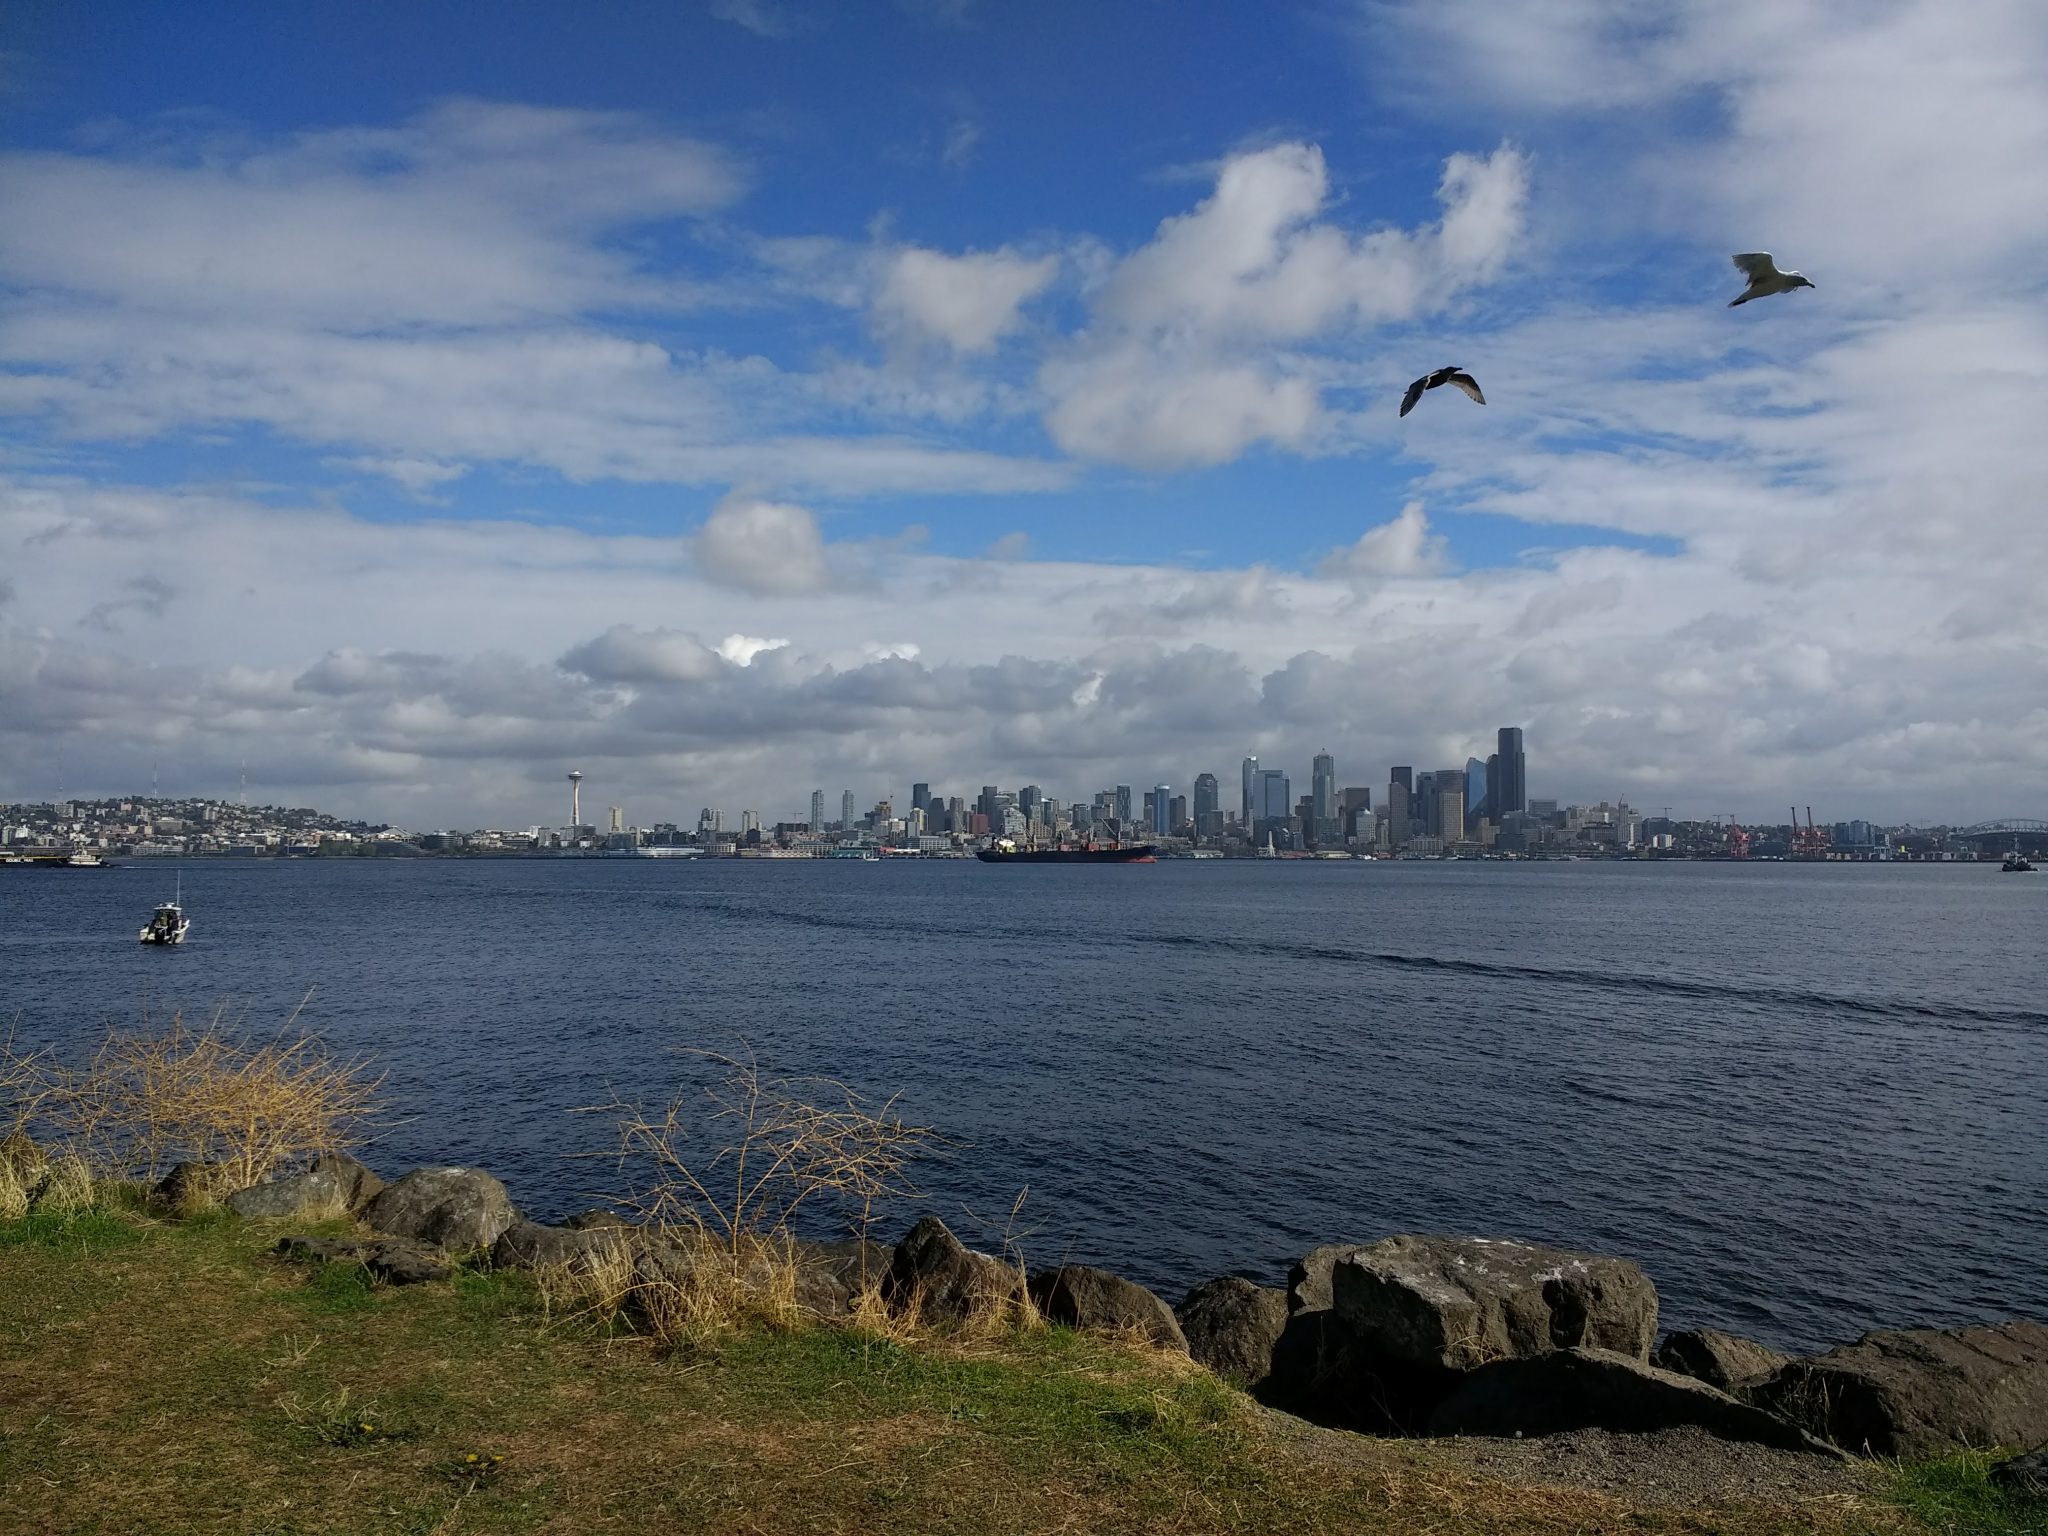 The Seattle skyline is seen from a distance across the water. There is a tanker ship in the harbor as well as a sailboat. There are two birds flying against a blue and cloudy sky. In the foreground on the shore there are rocks and grass